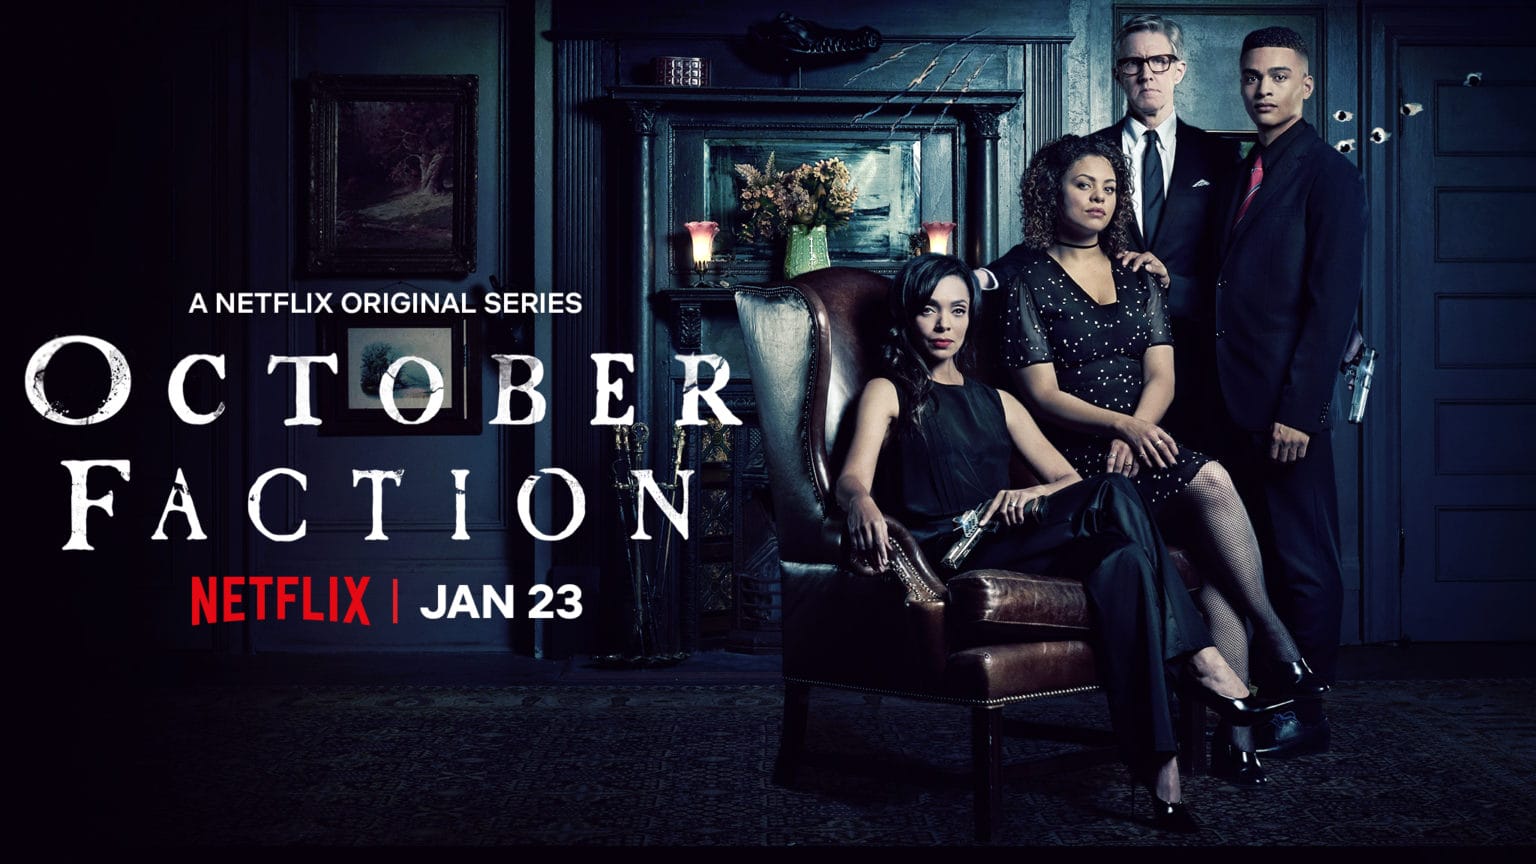 NETFLIX OCTOBER IN JANUARY WITH OCTOBER FACTION SEASON ONE